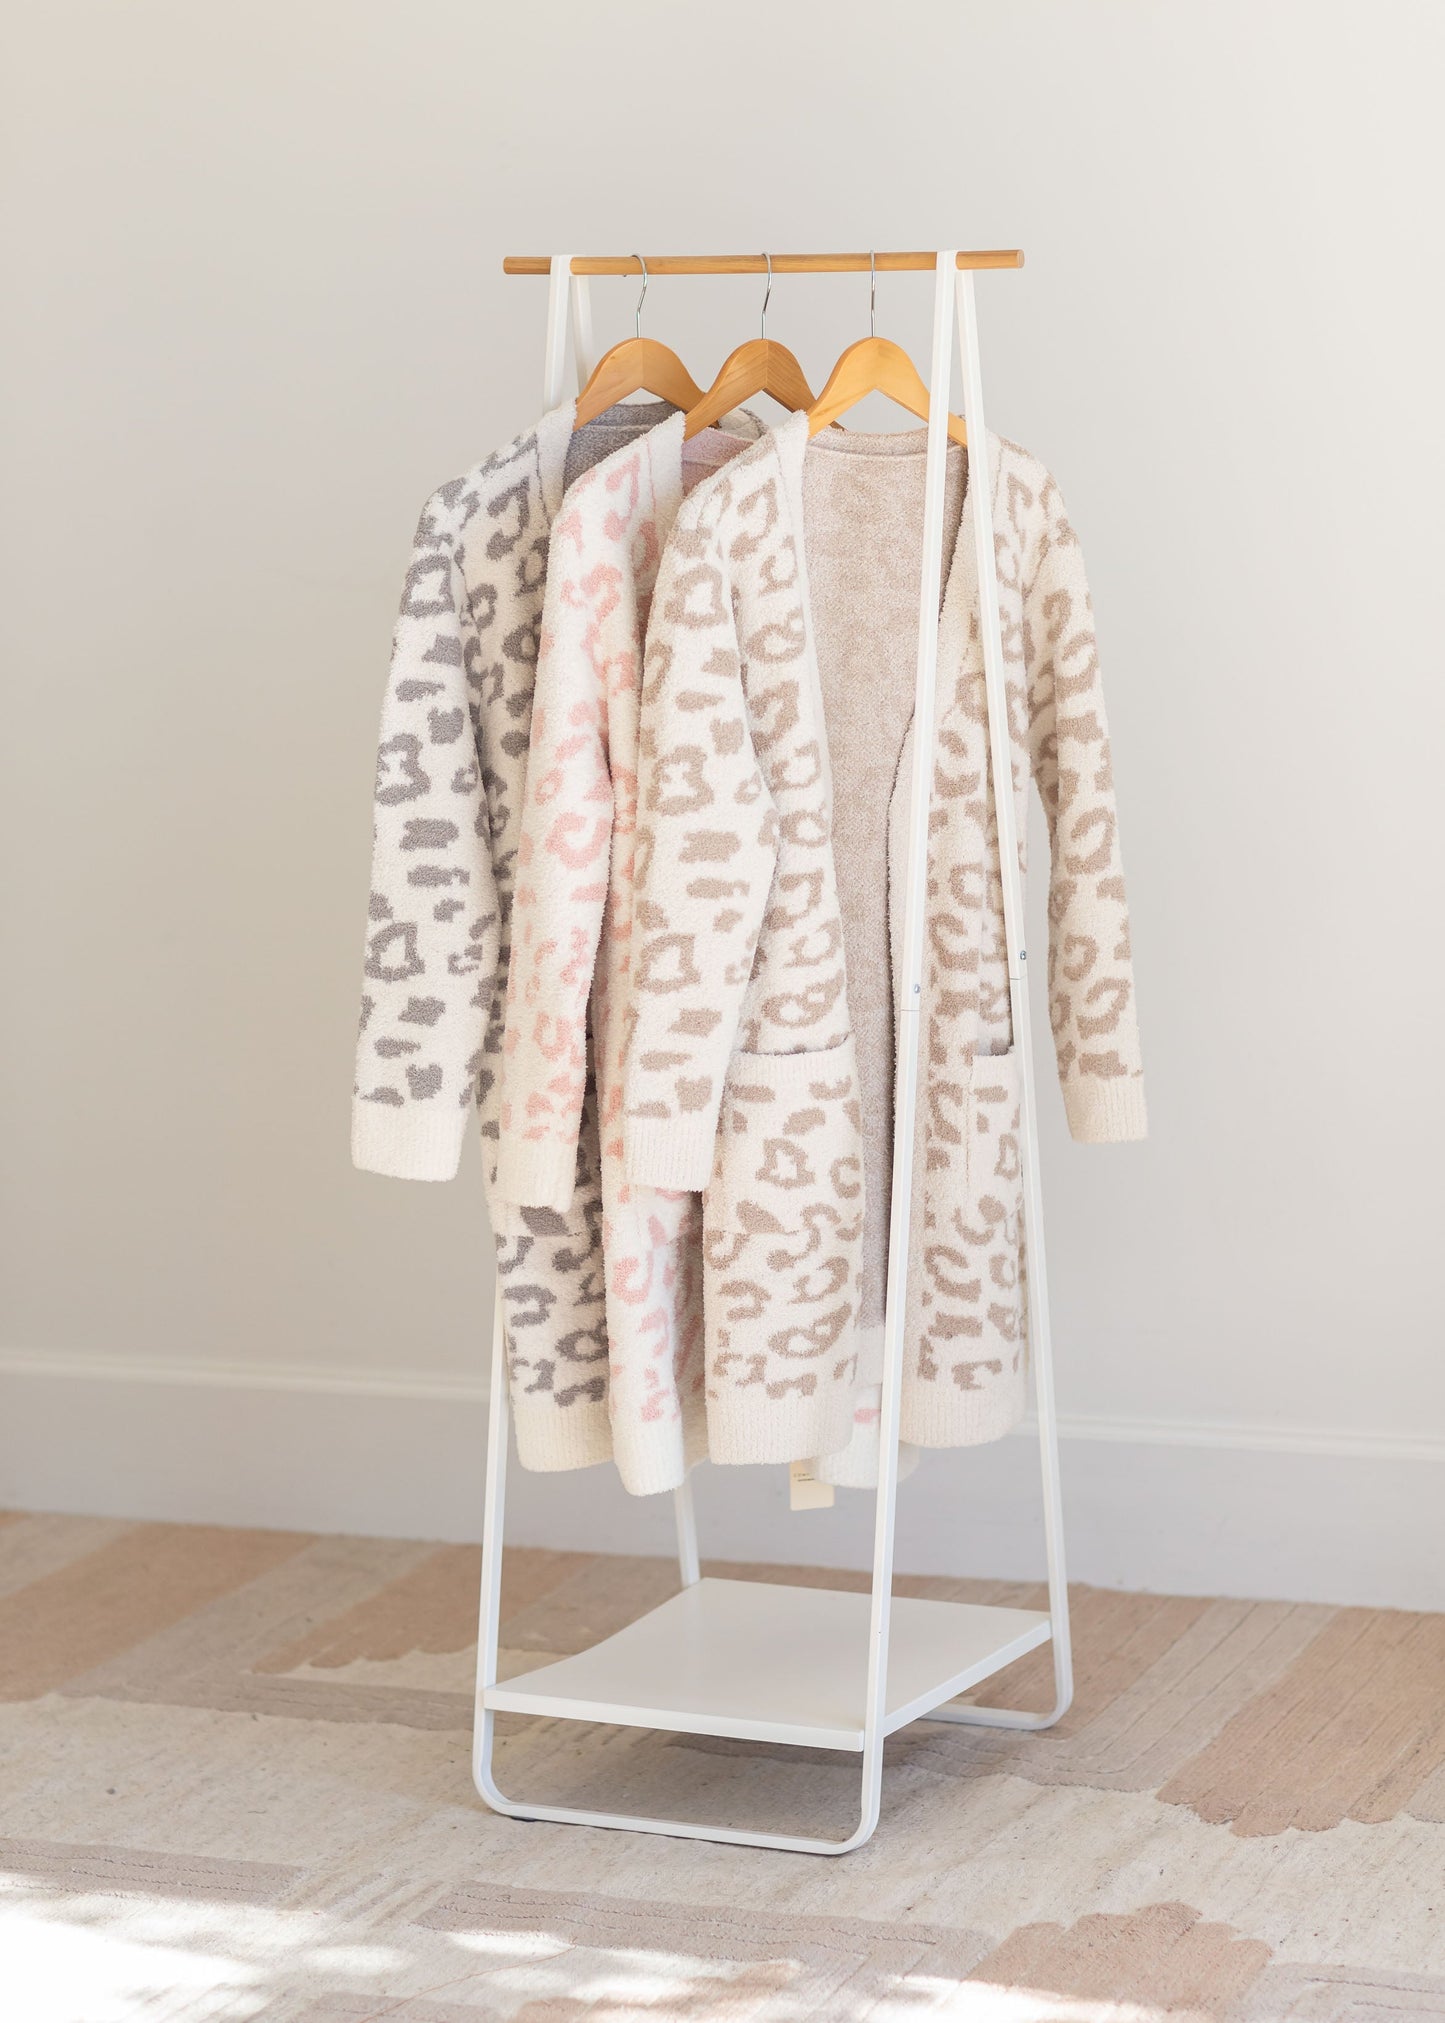 Leopard Print Robe comes in 3 color options grey, pink and beige with a leopard print, fleece style, with a tie waist, and is hip length.